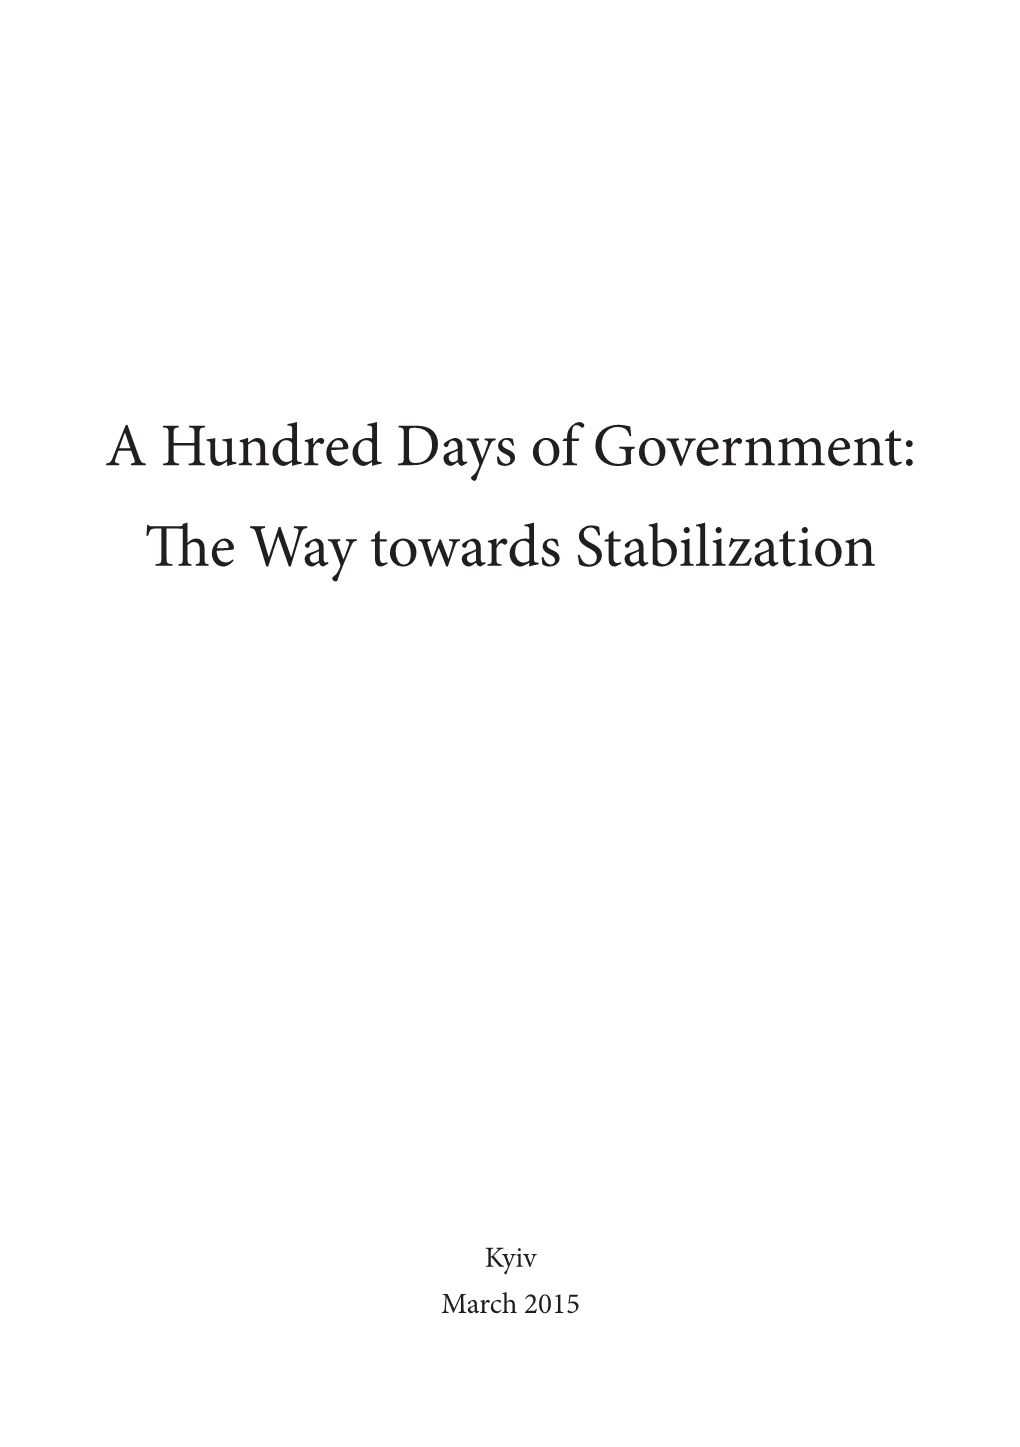 A Hundred Days of Government: the Way Towards Stabilization